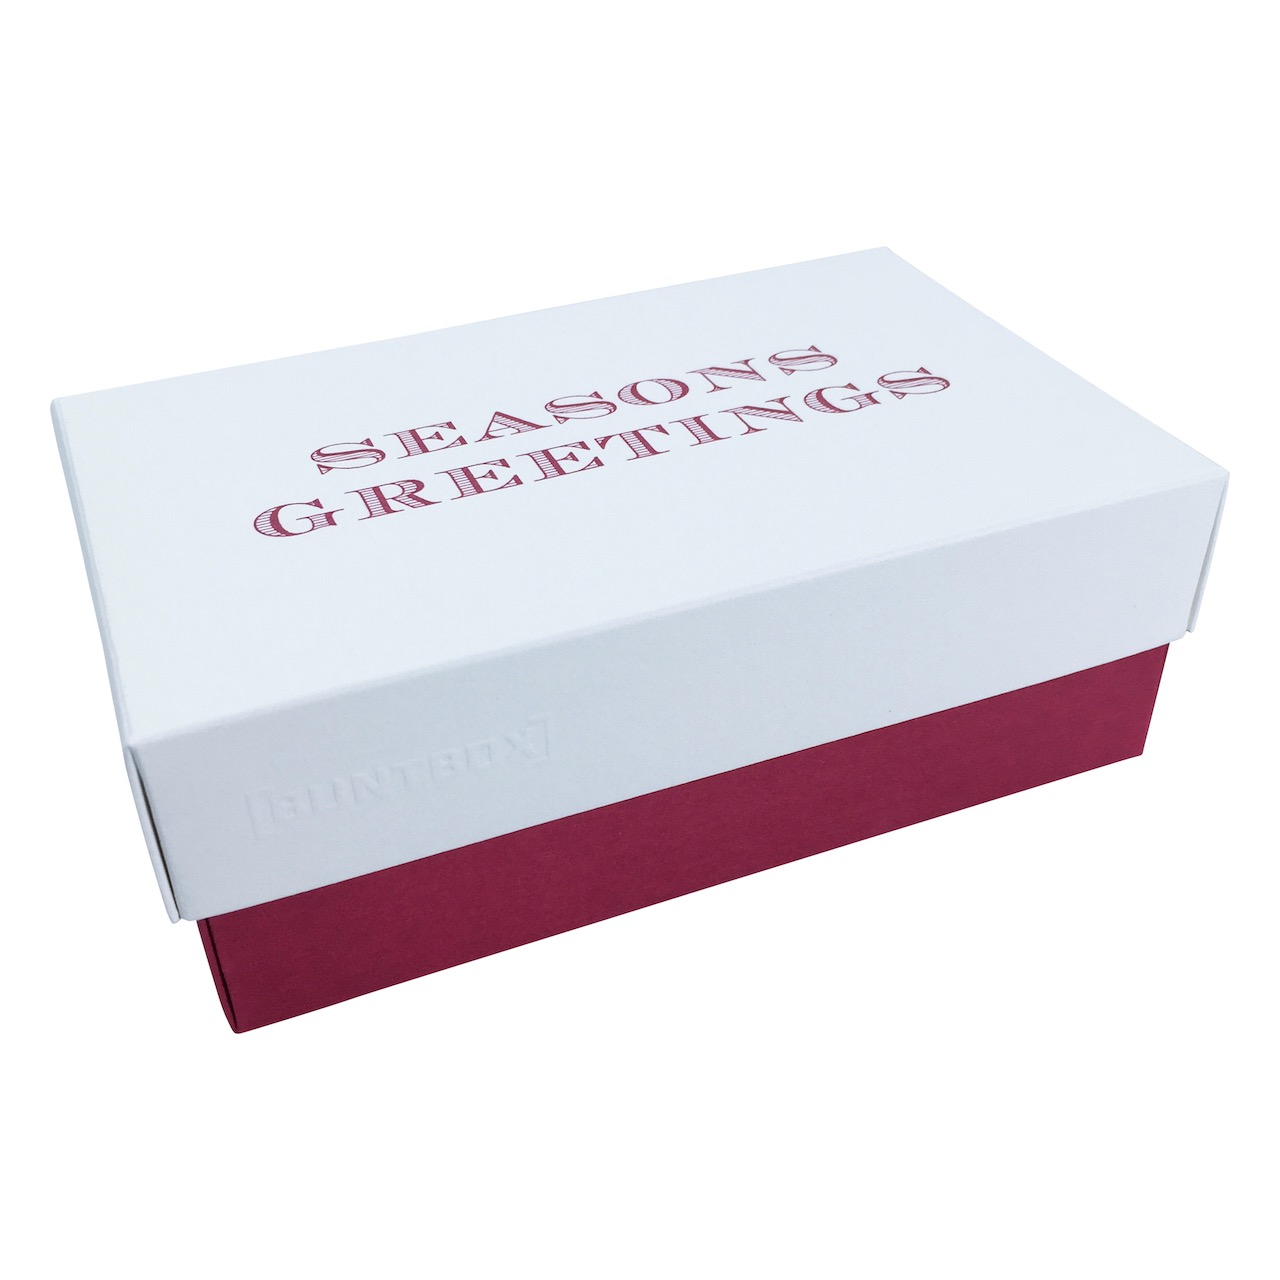 Fine Paper Edition Buntbox Champagne - Bordeaux 'Seasons Greetings' - Red